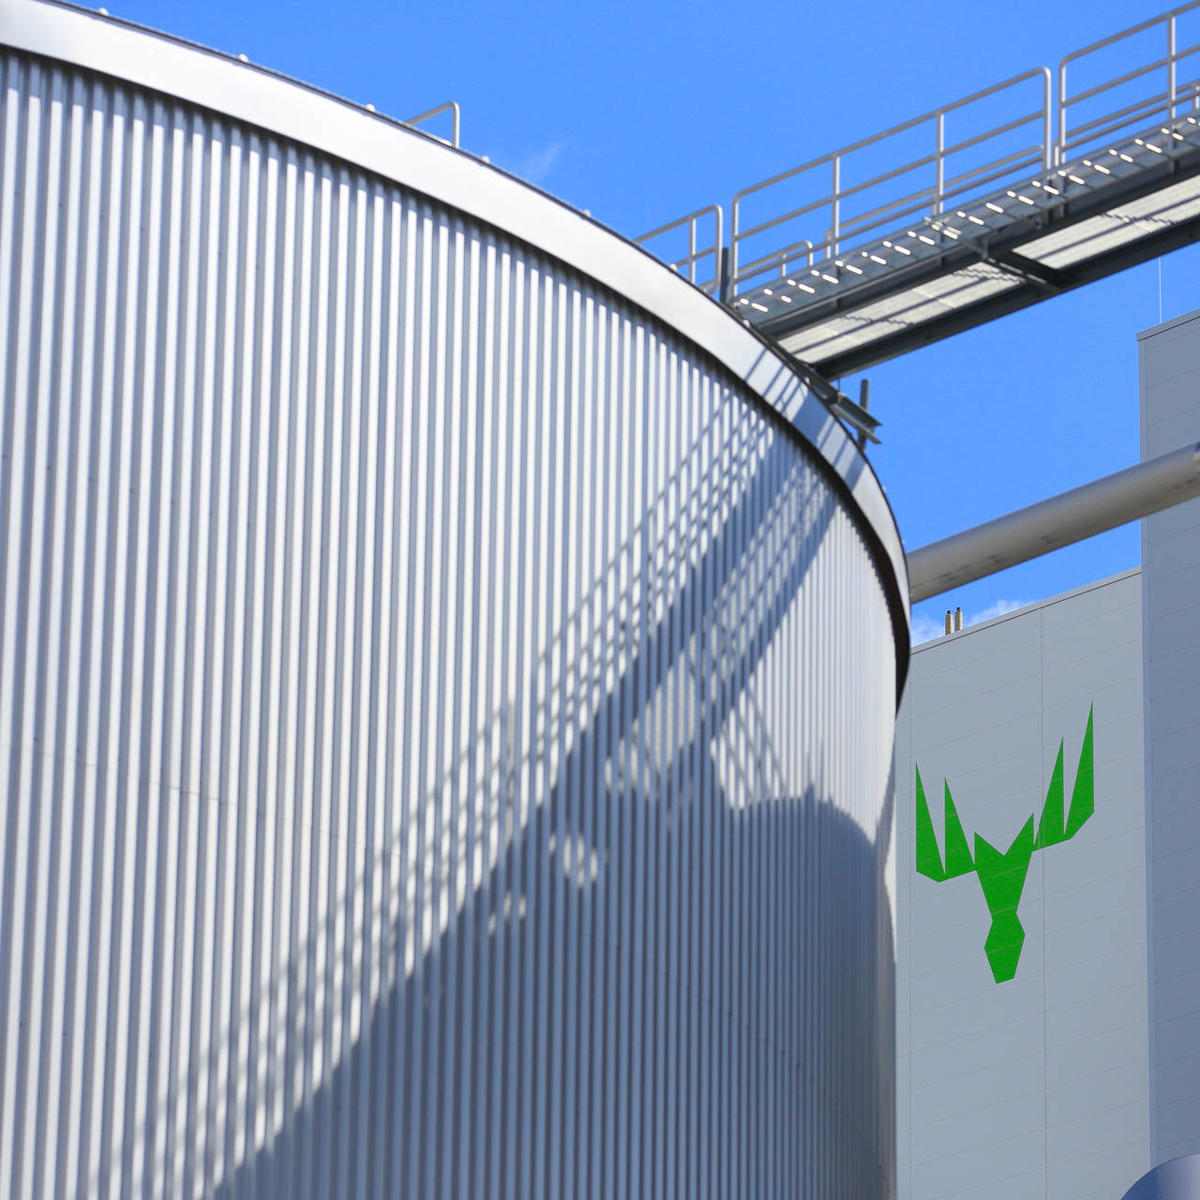 Biopellets and biogas